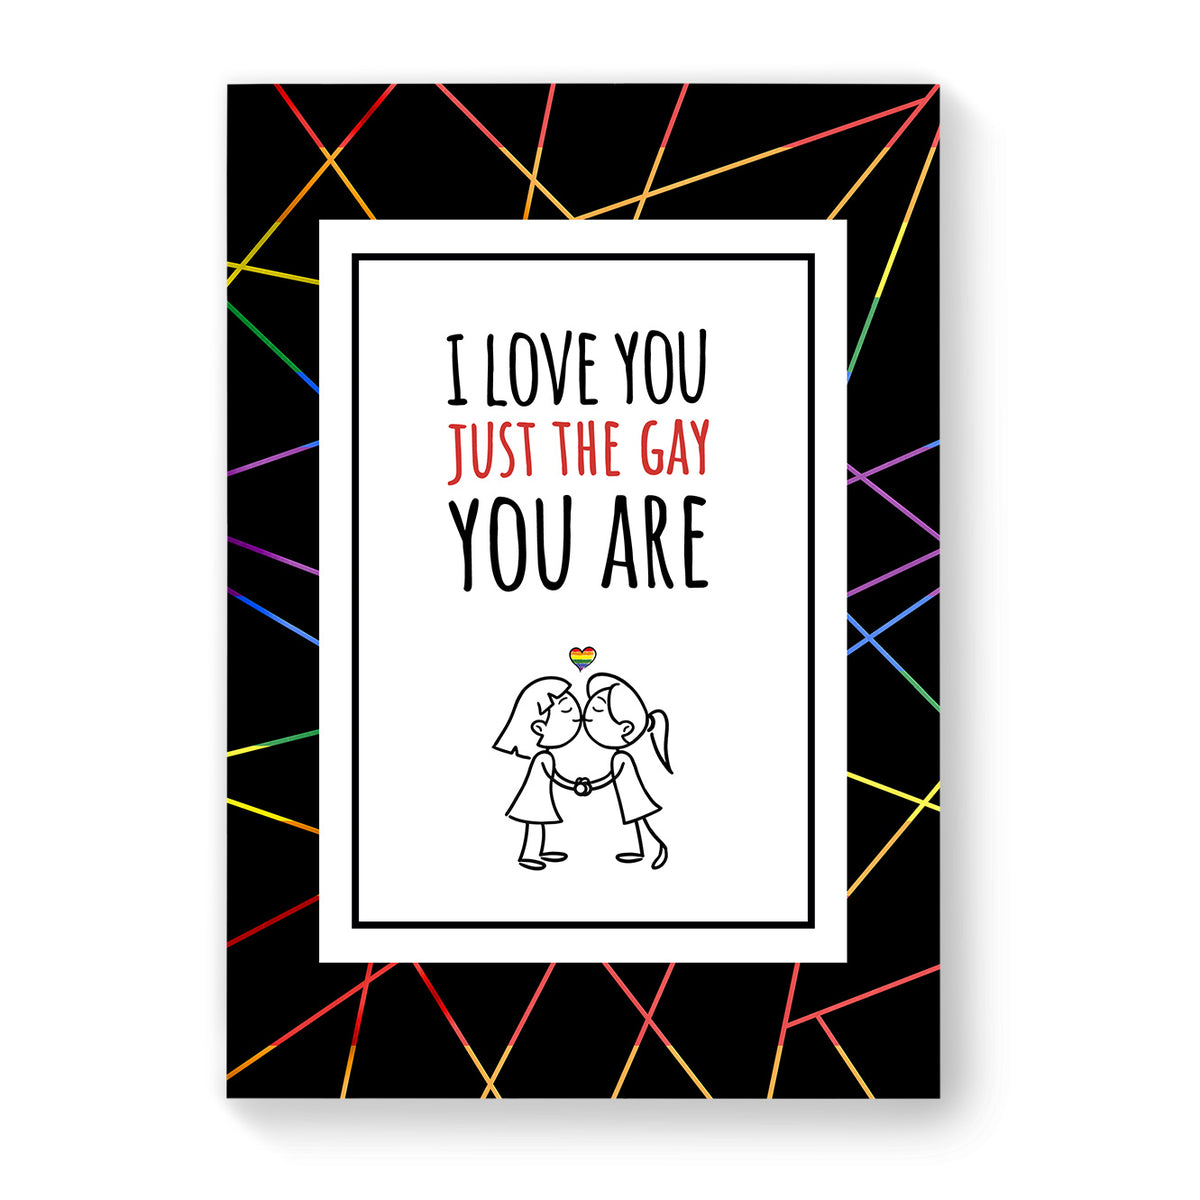 I love you just the gay you are - Lesbian Gay Couple Card - Black Geometric | Gift